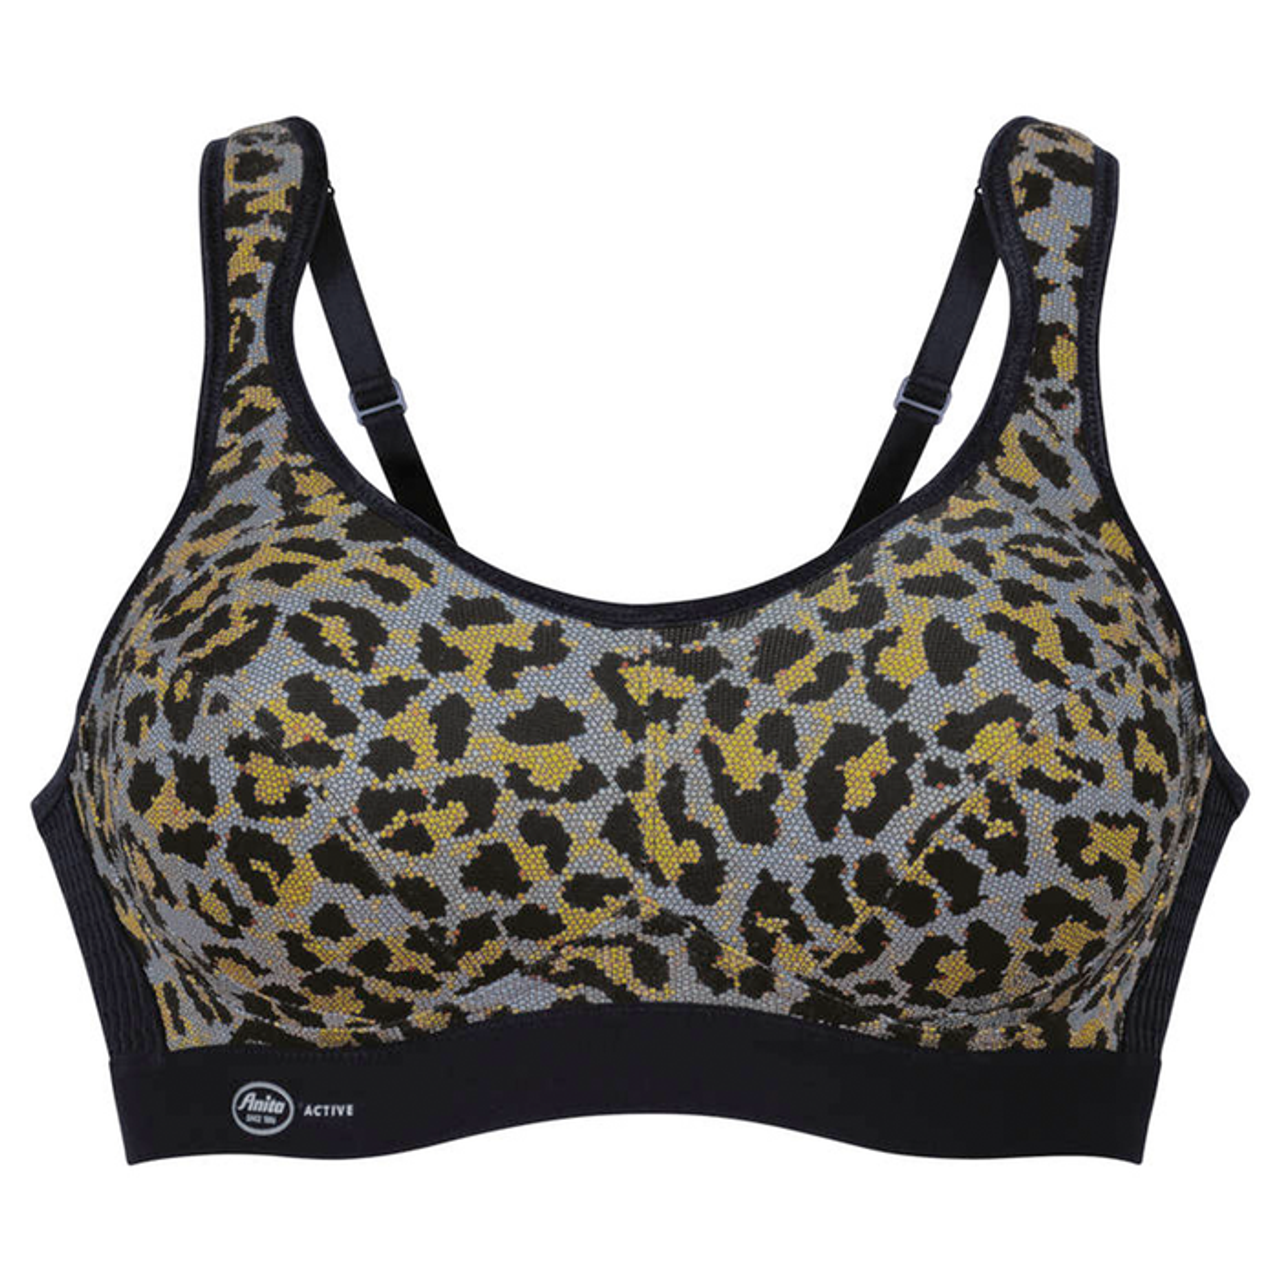 Take a Walk on the Wild Side with Anita Active´s bestselling Air